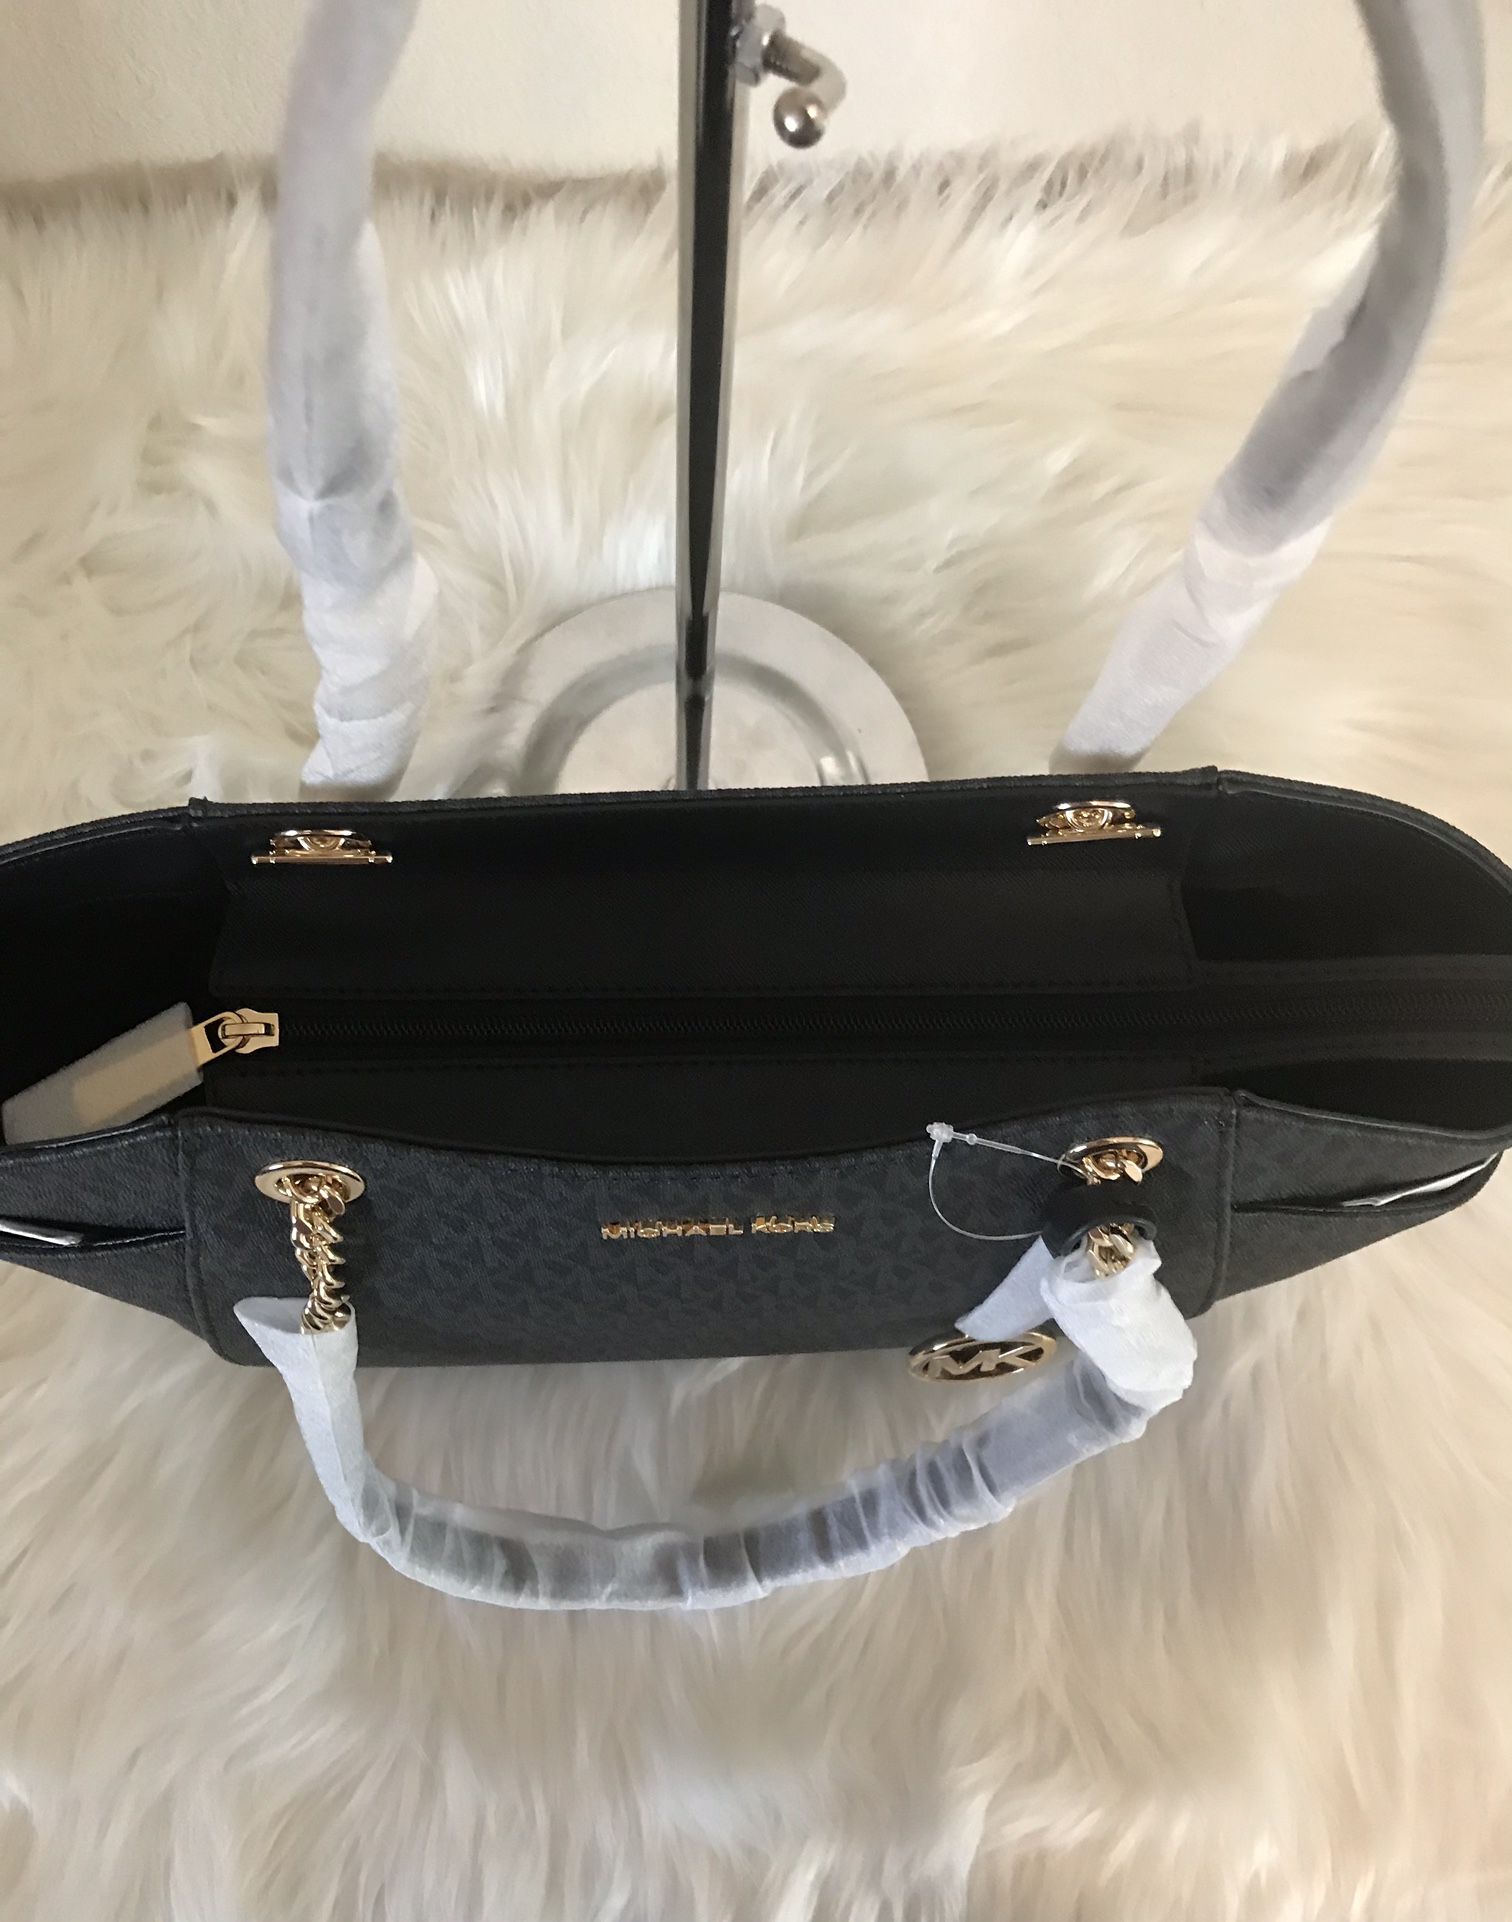 Michael Kors jet Set Travel Tote for Sale in New York, NY - OfferUp